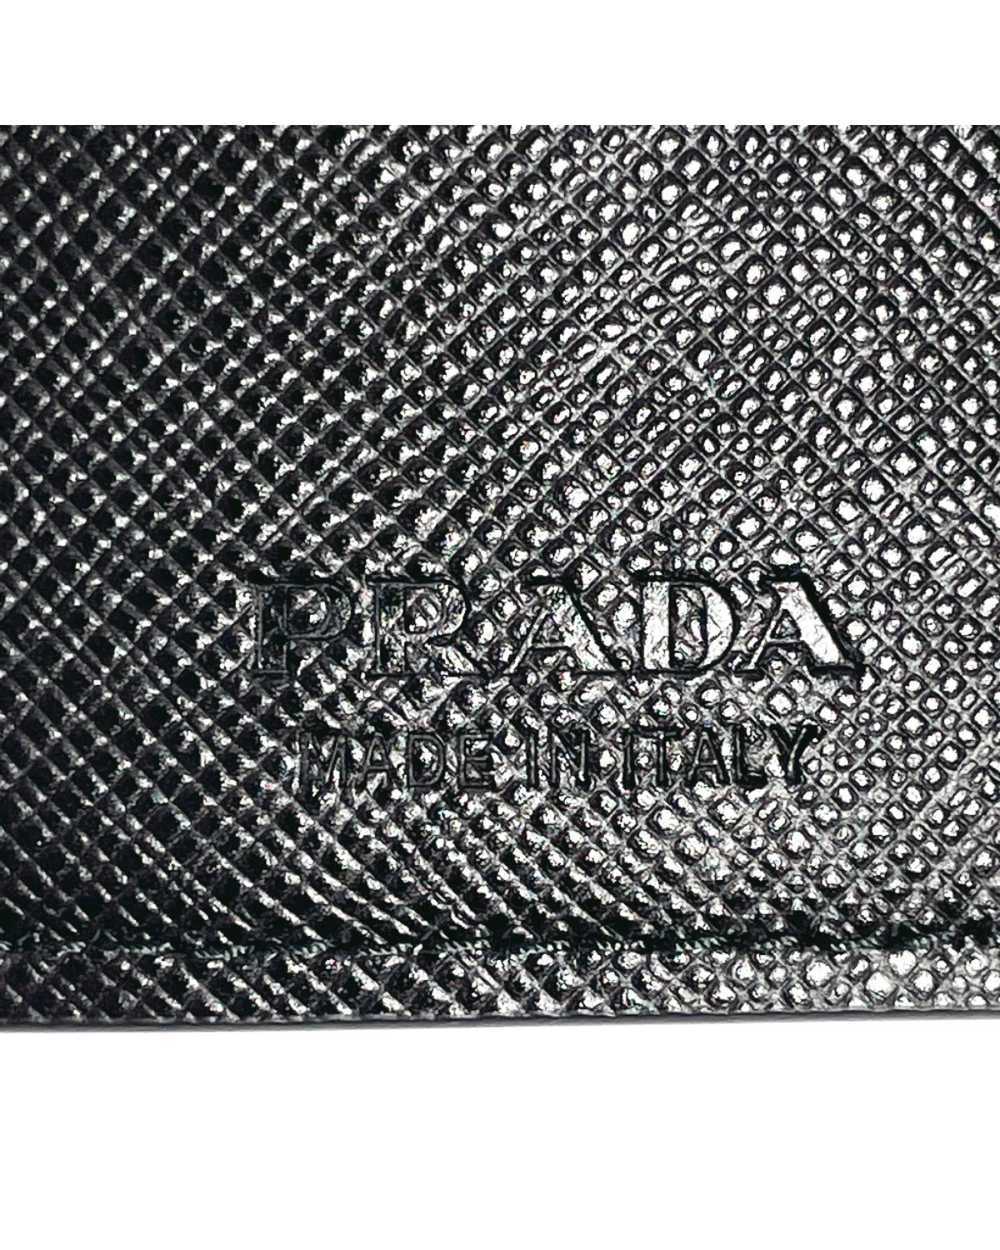 Prada Black Leather Trifold Wallet with Textured … - image 10